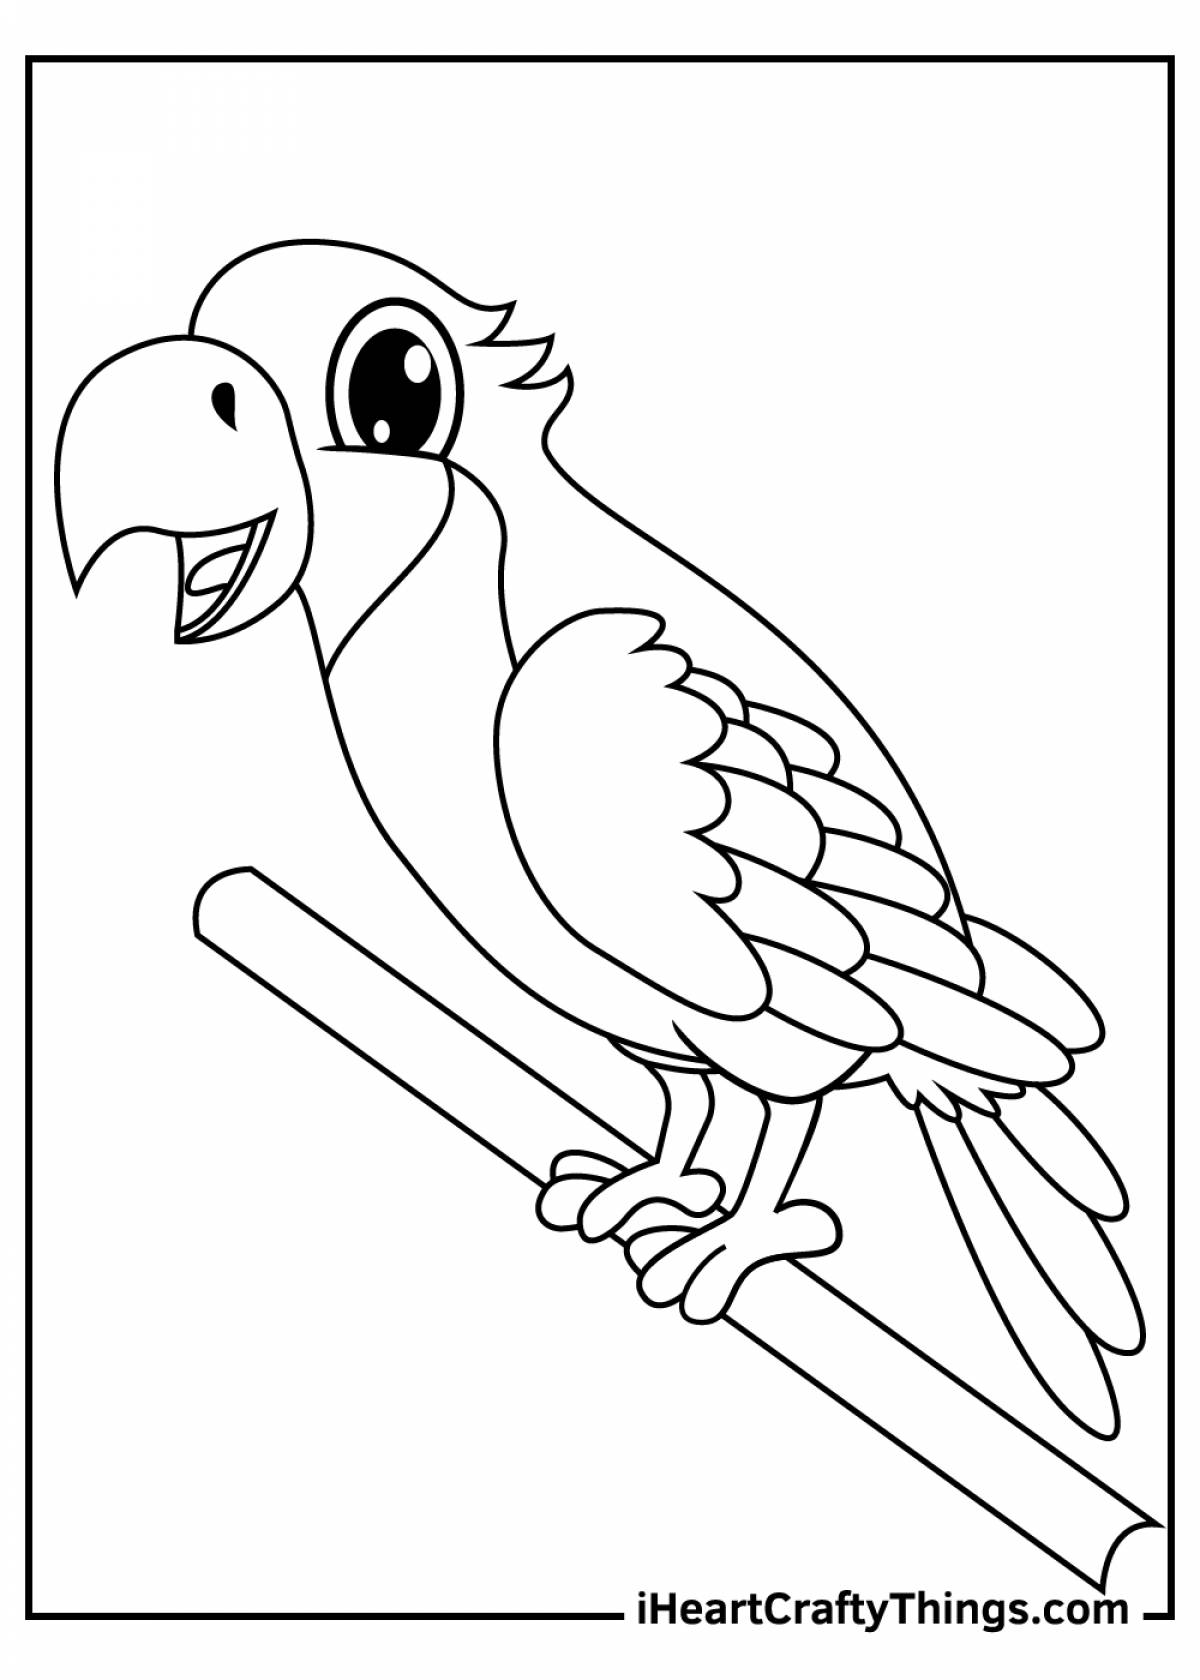 Coloring parrot for children 6-7 years old